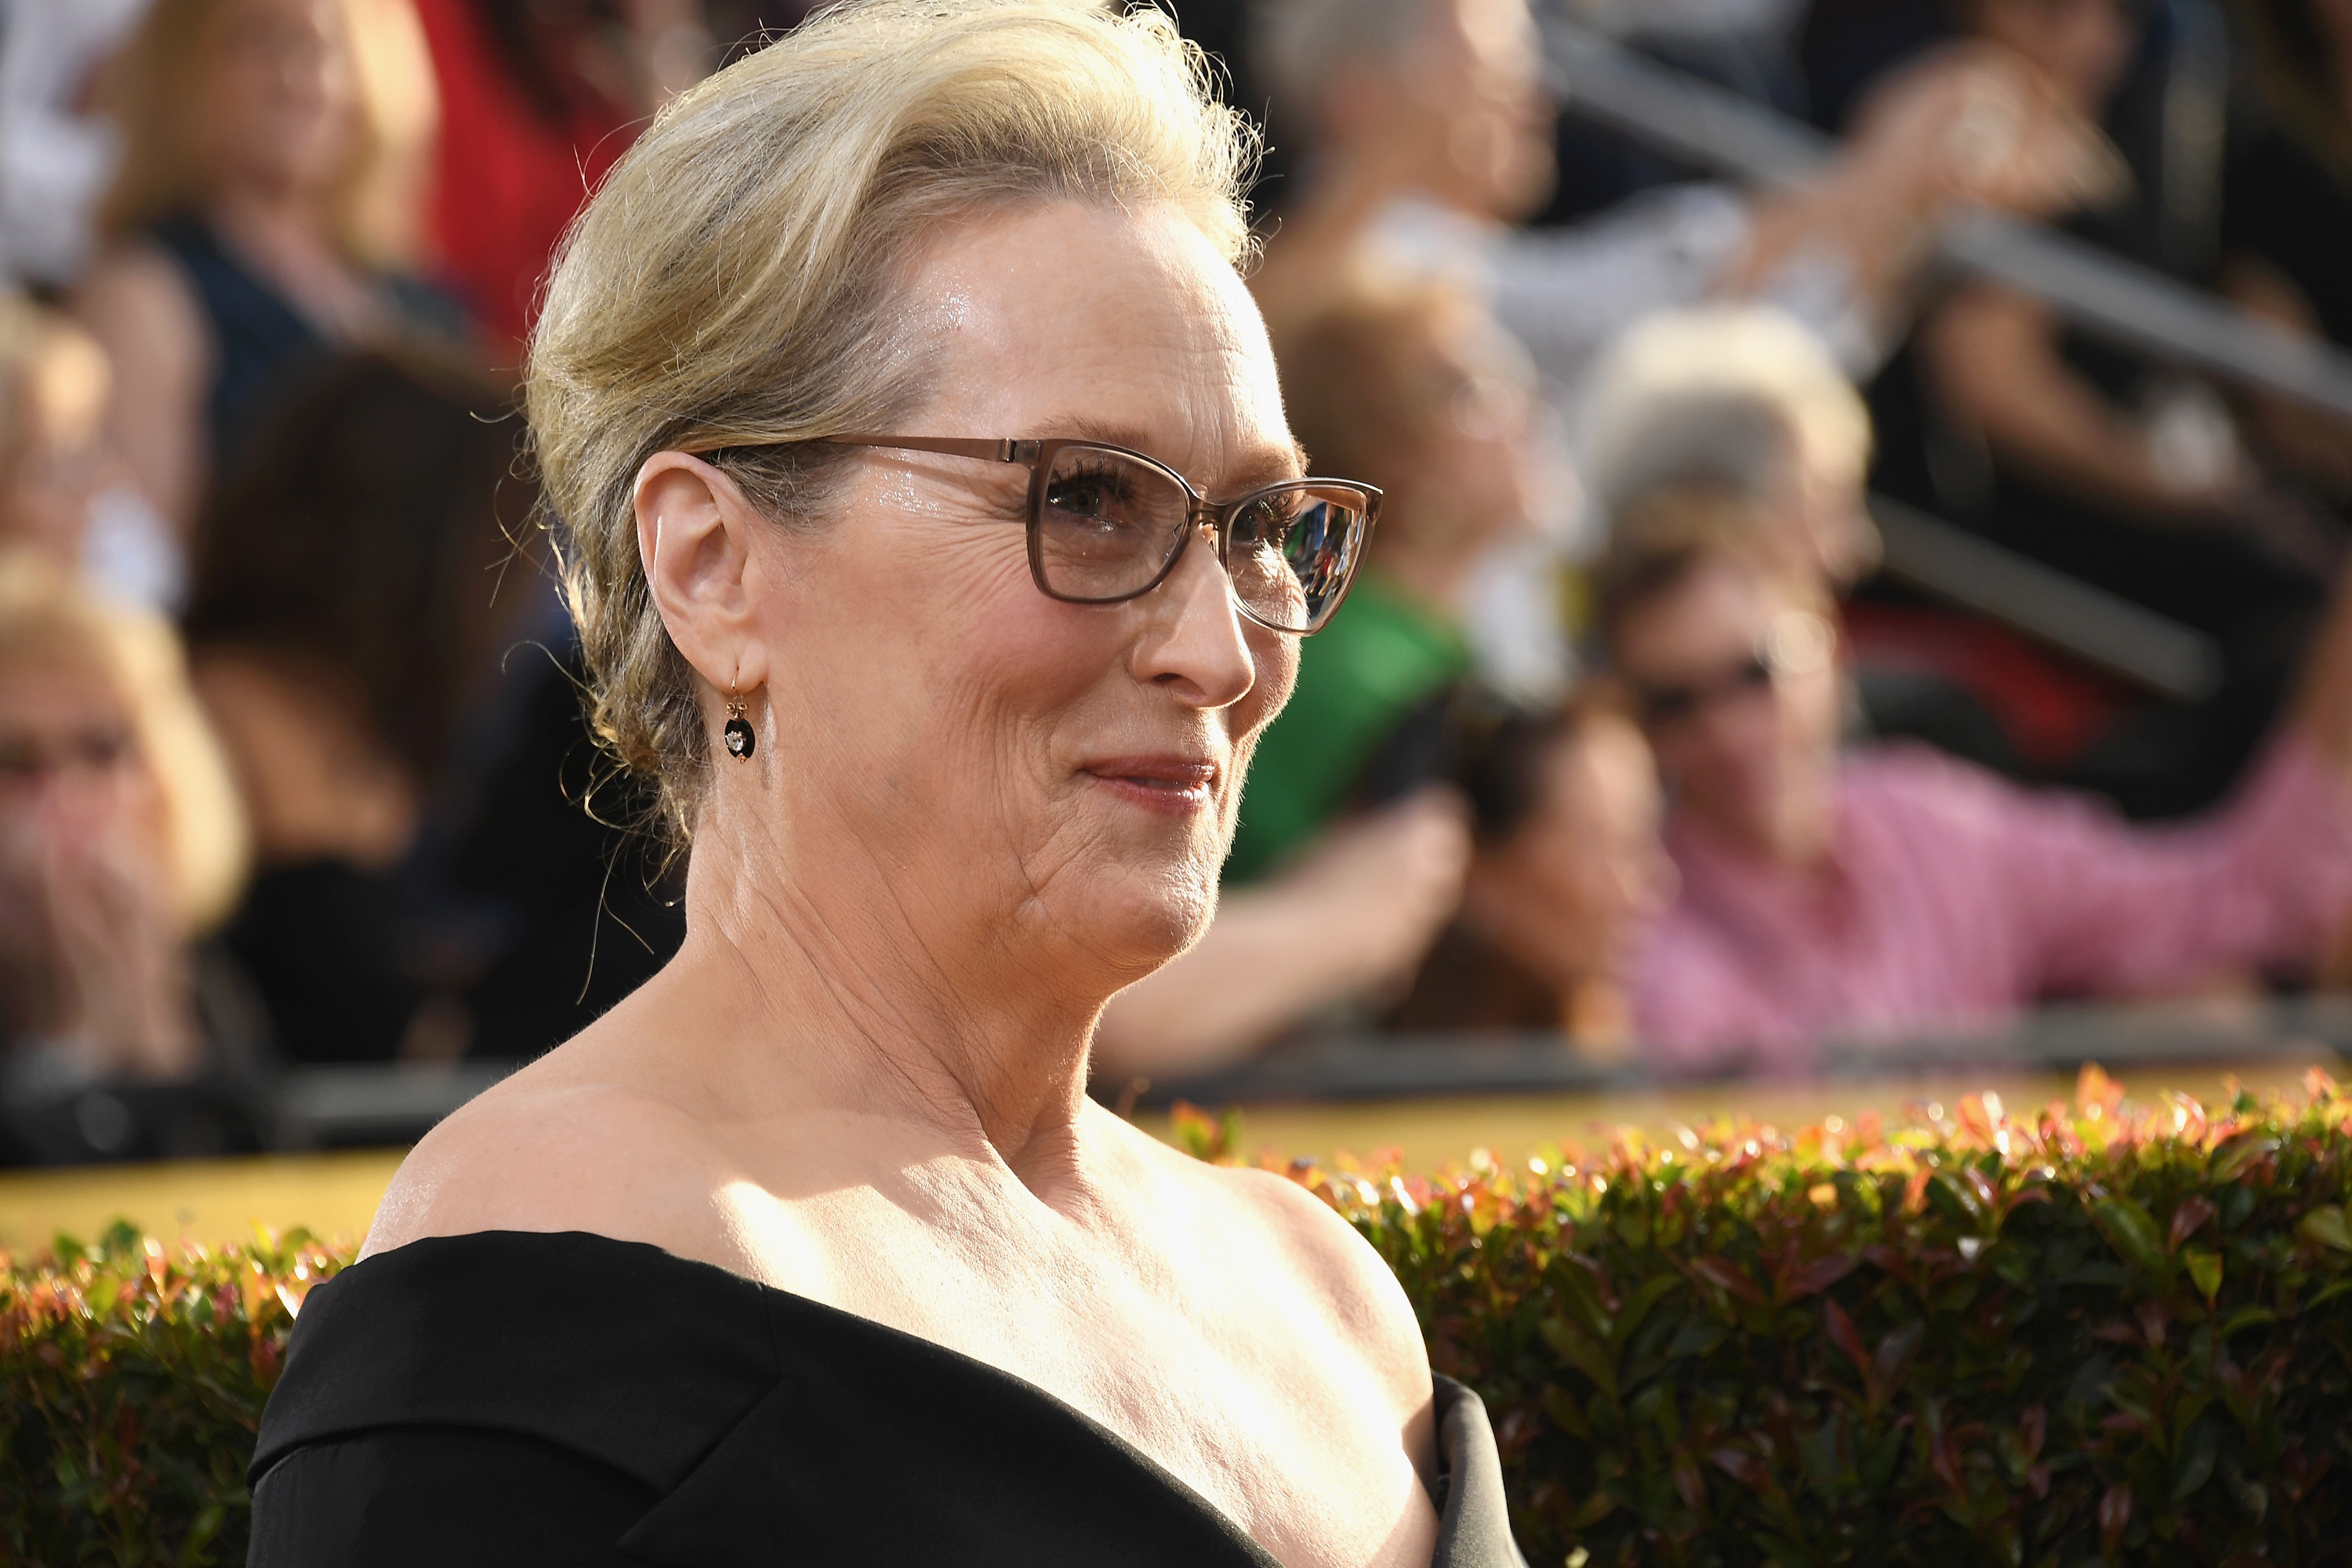 Meryl Streep arrives to the 75th Annual Golden Globe Awards held at the Beverly Hilton Hotel on Jan. 7, 2018. (Kevork Djansezian/NBC&mdash;NBCU Photo Bank via Getty Images via Getty Images)